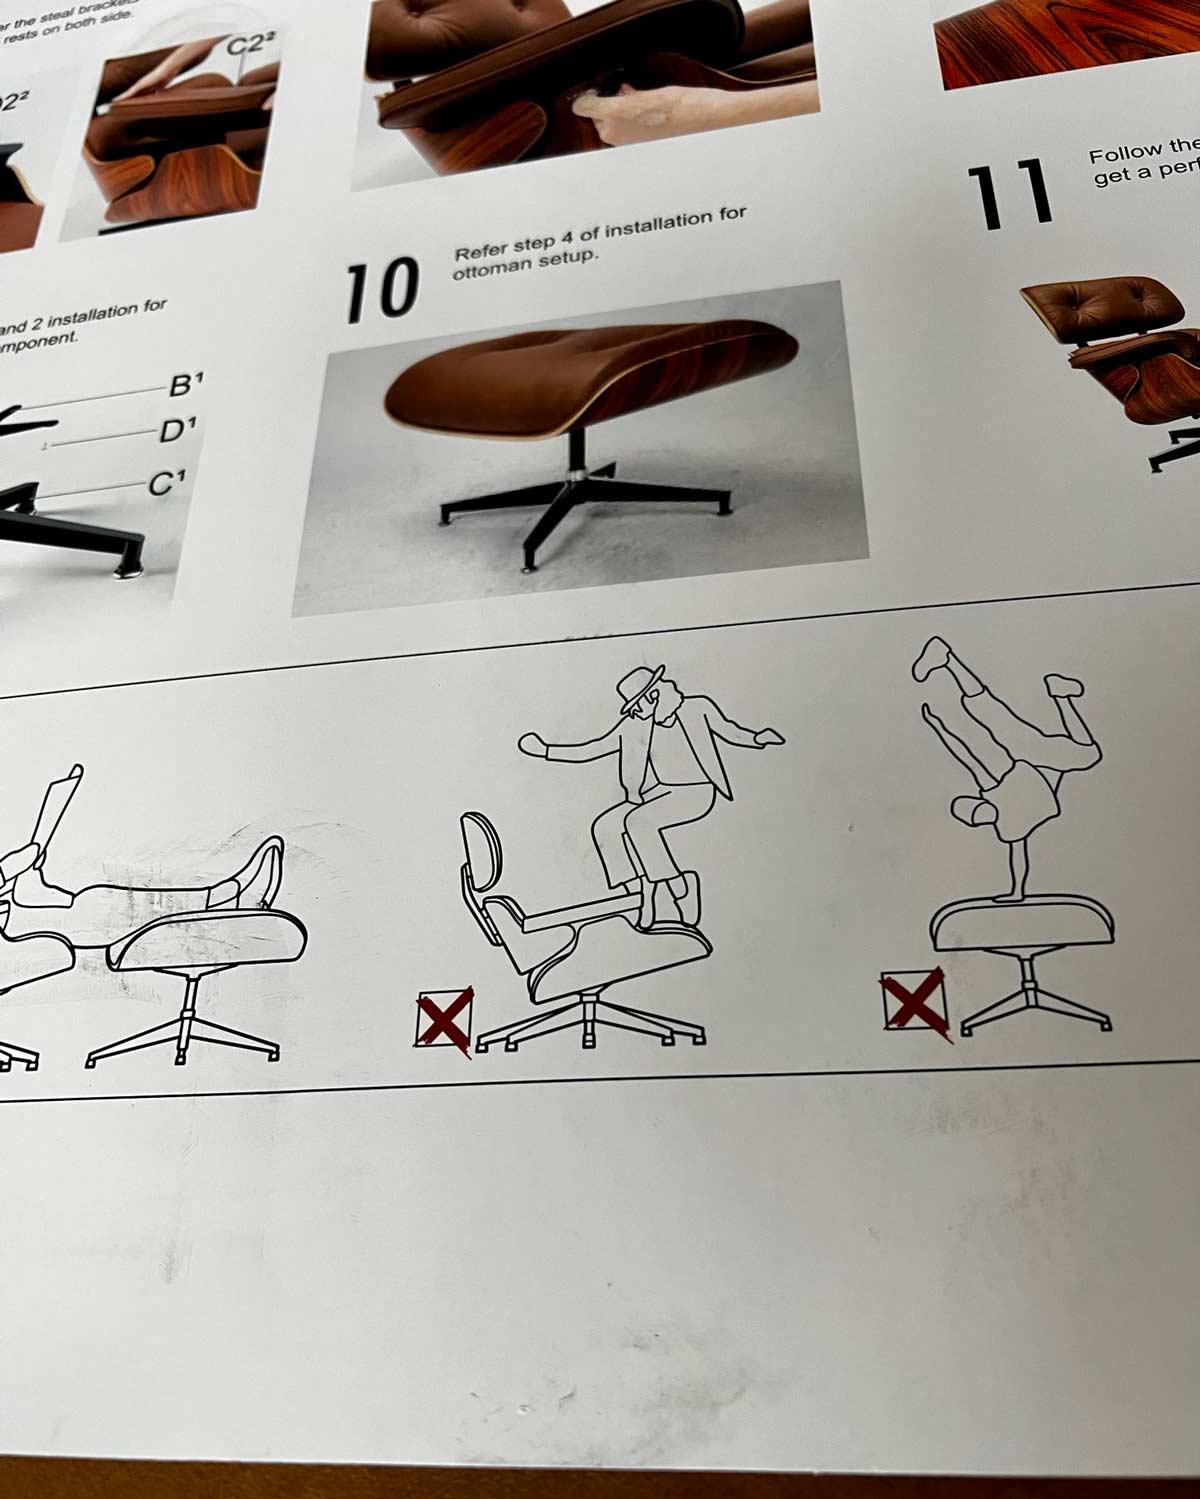 According to the installation instructions, I shouldn't be a smooth criminal on my new chair